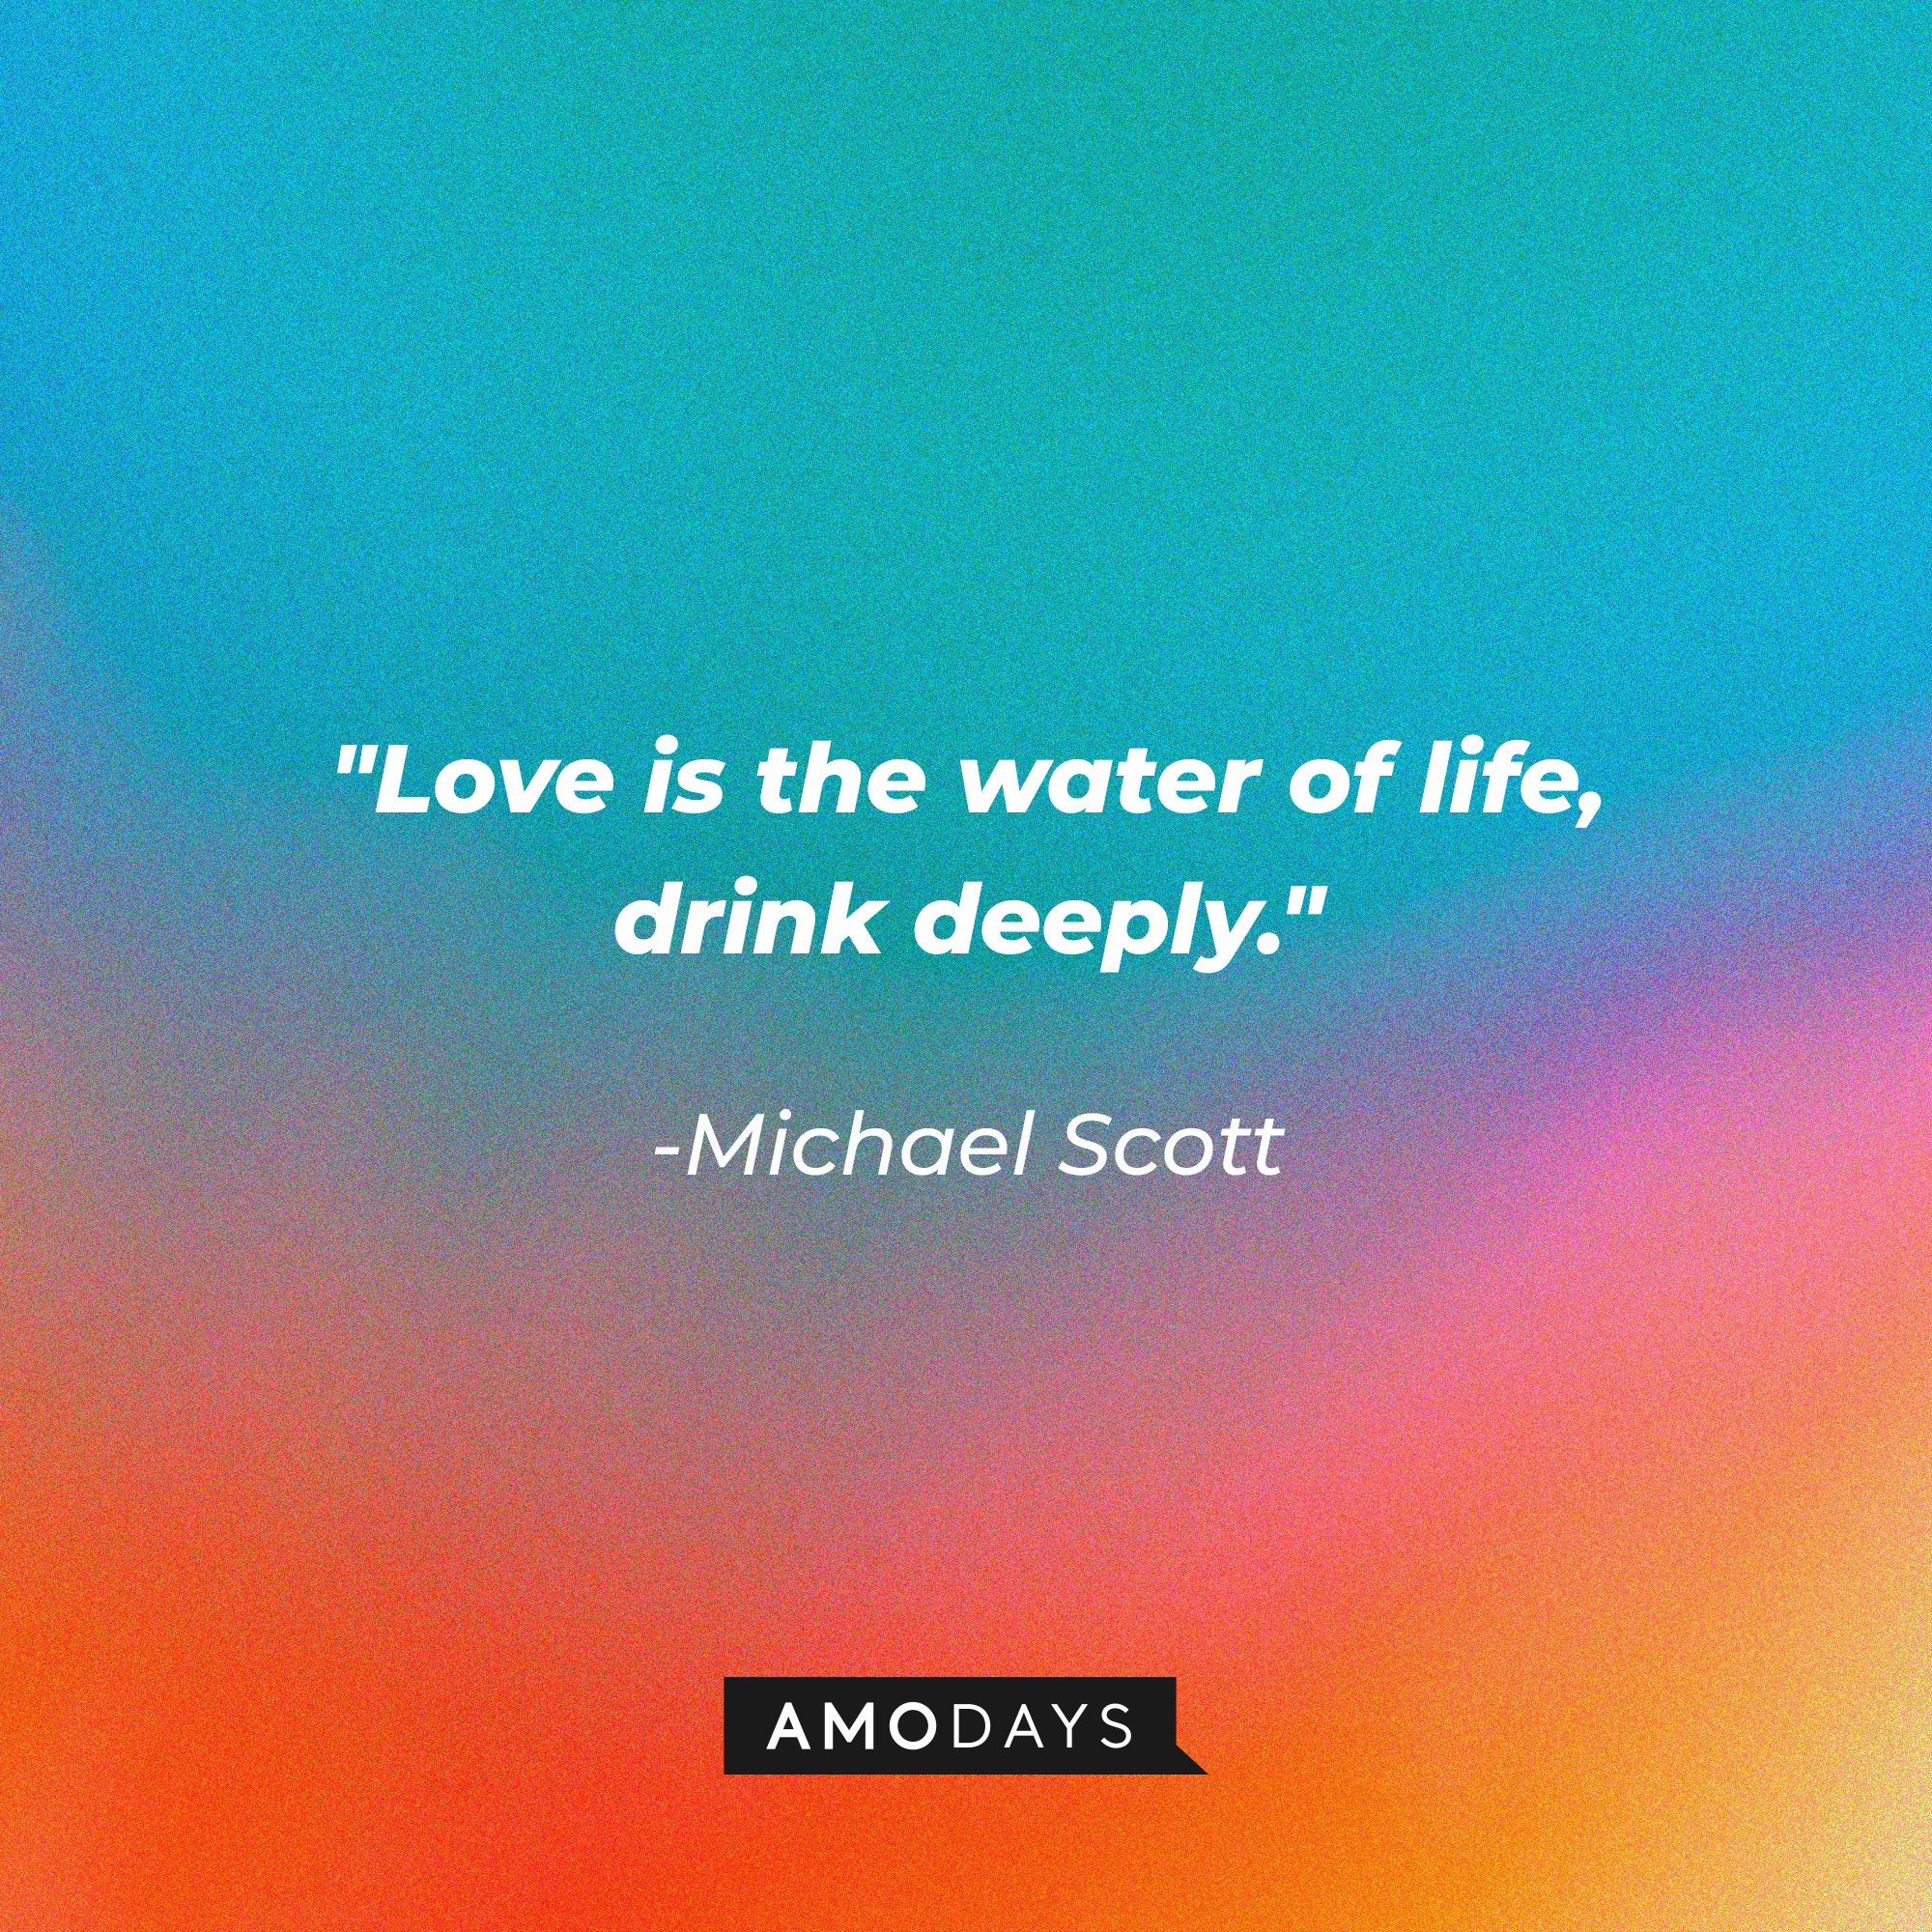 Michael Scott’s quote: "Love is the water of life, drink deeply." | Image: AmoDays